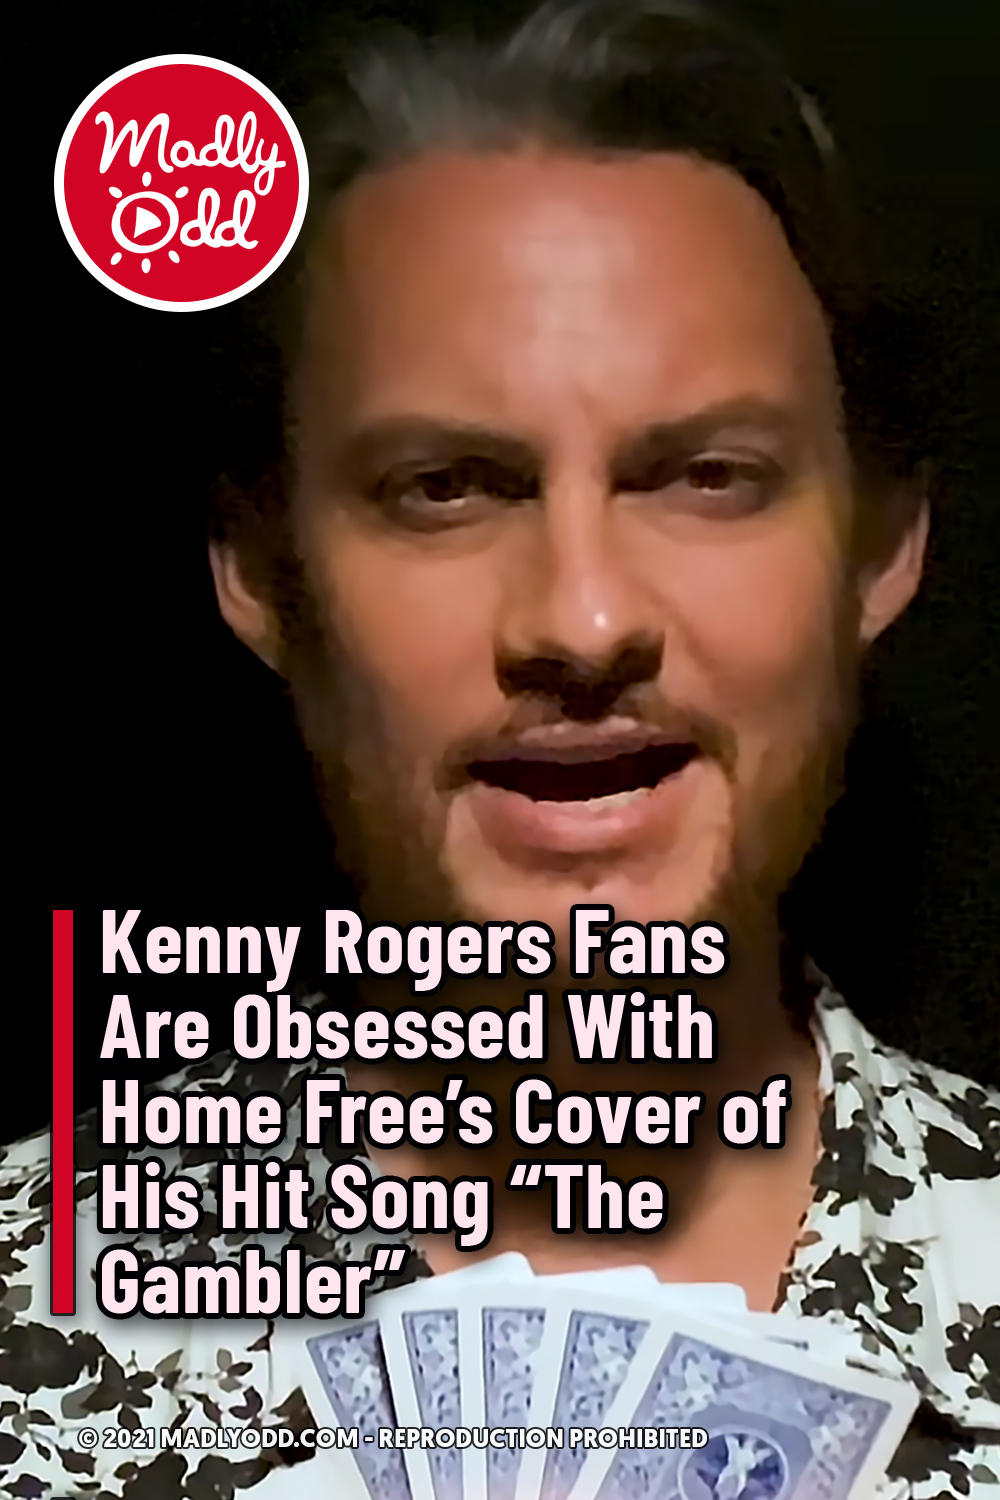 Kenny Rogers Fans Are Obsessed With Home Free’s Cover of His Hit Song “The Gambler”